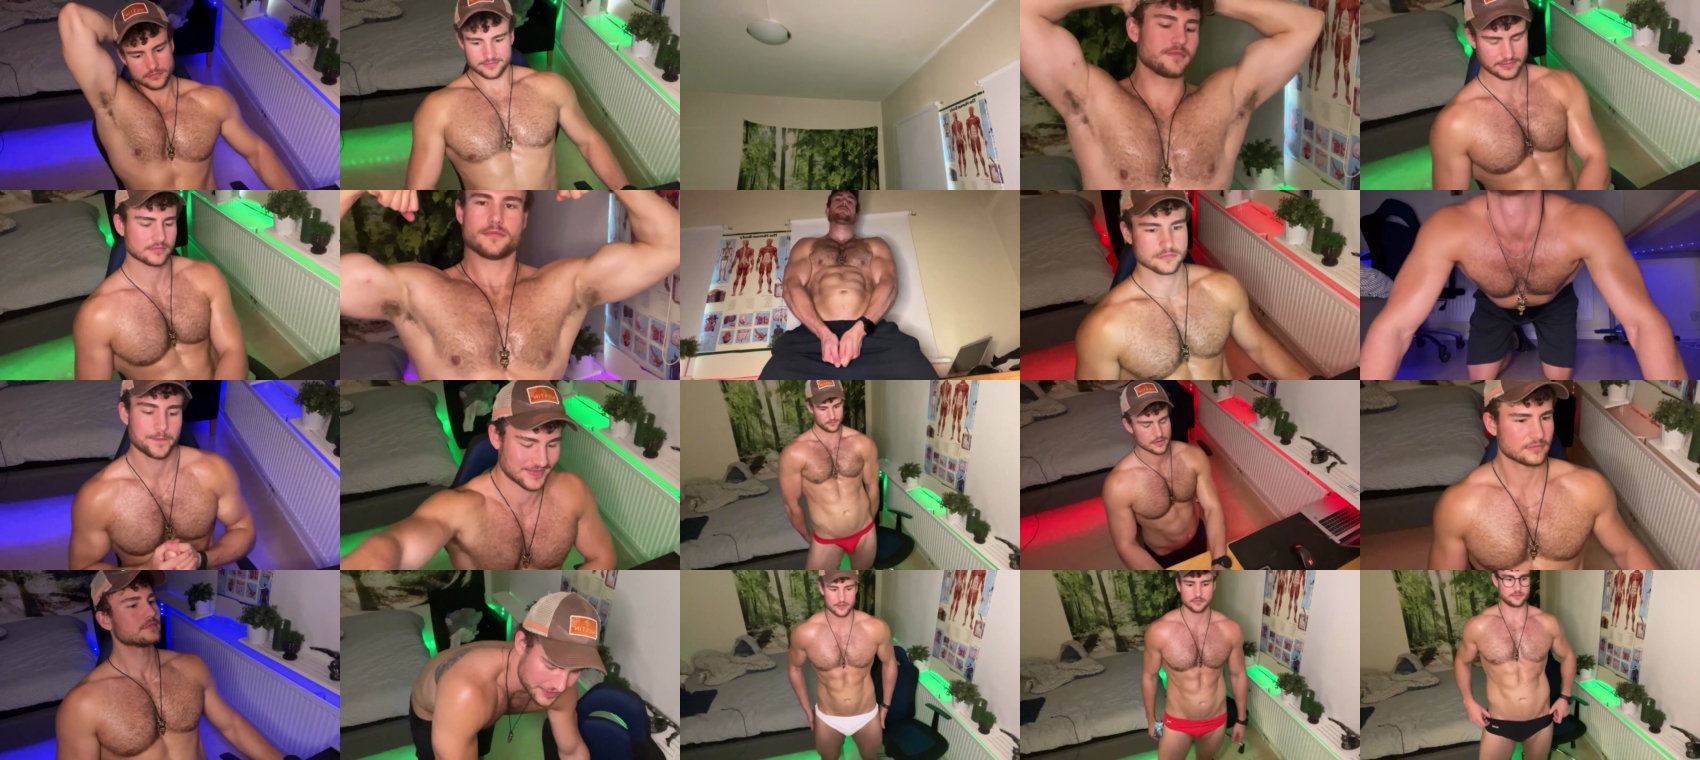 christiankent0 sexykitty Webcam SHOW @ Chaturbate 27-07-2023